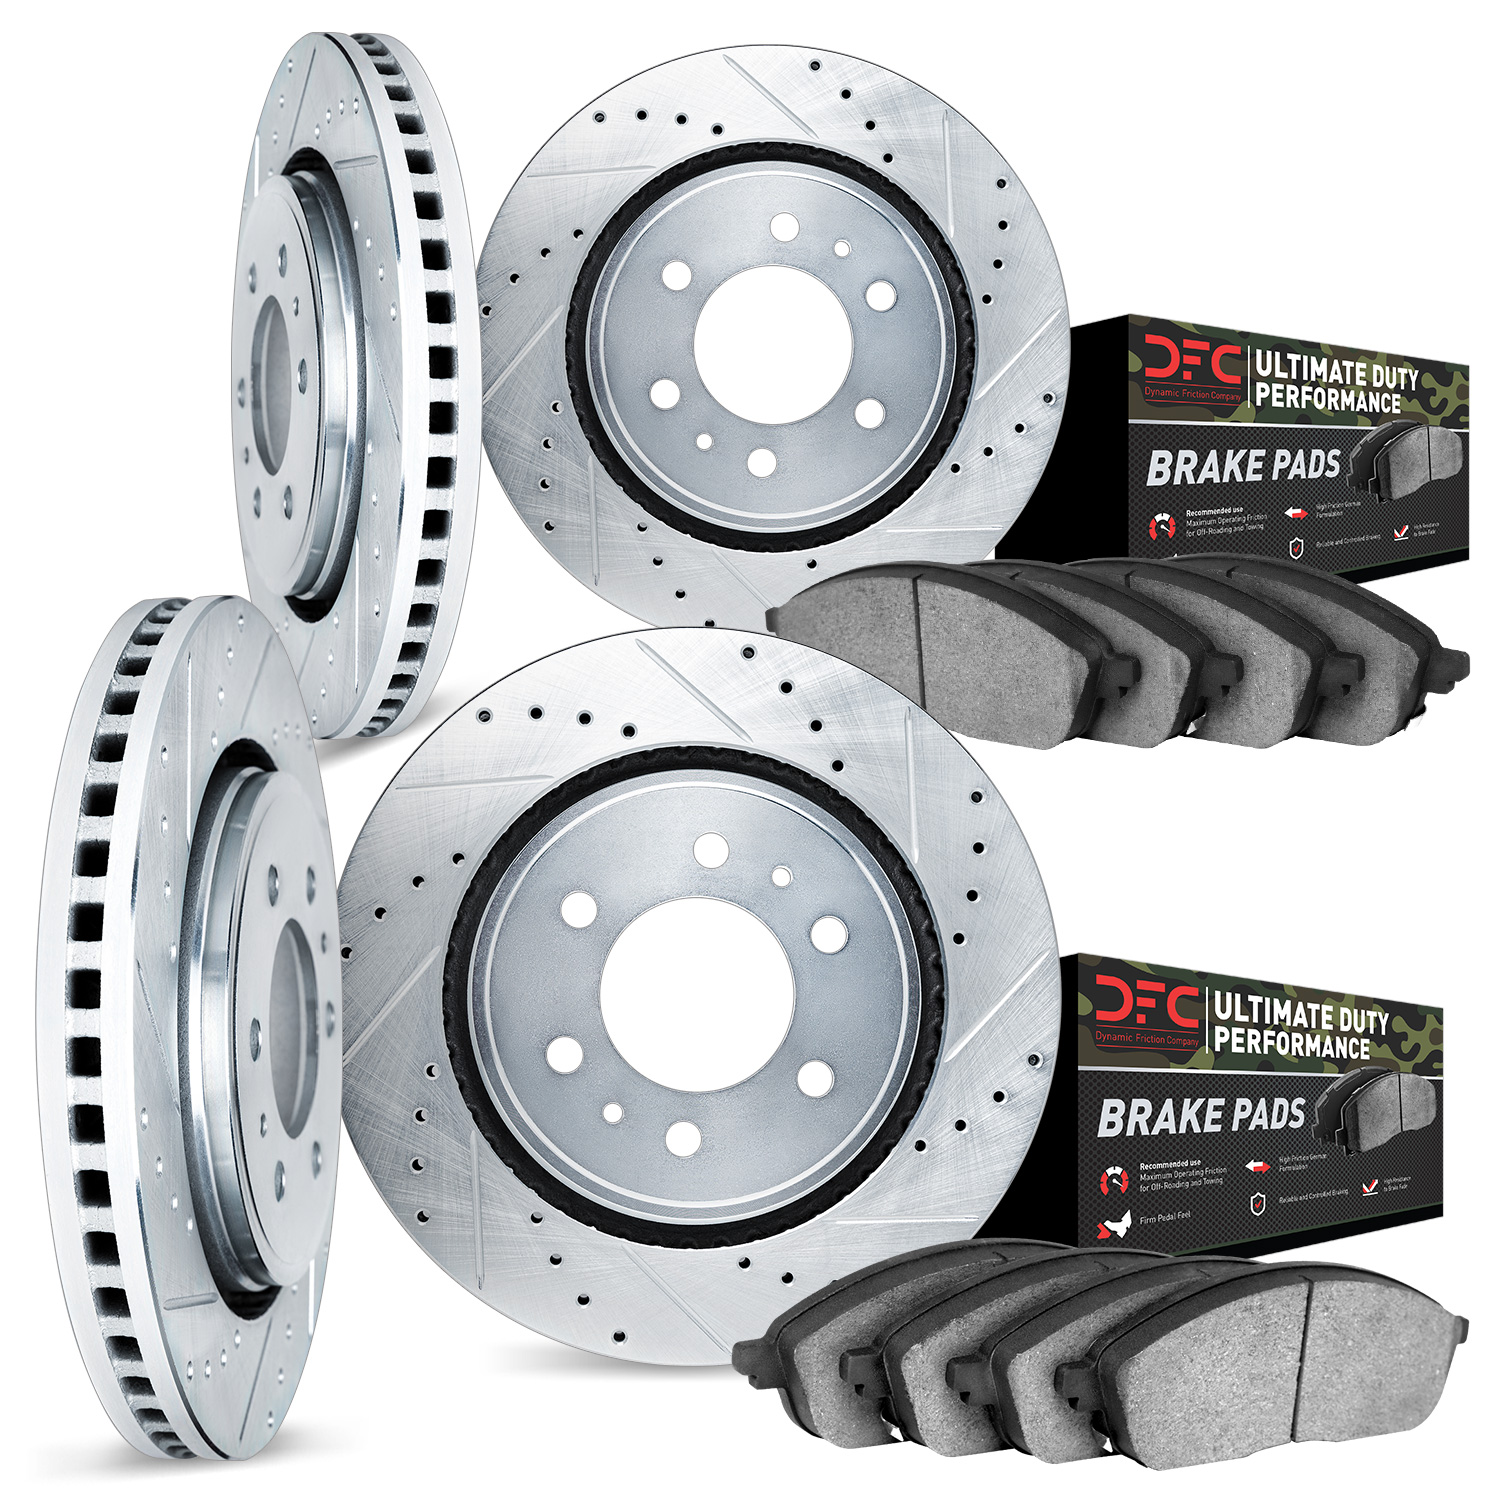 7404-48016 Drilled/Slotted Brake Rotors with Ultimate-Duty Brake Pads Kit [Silver], 2014-2020 GM, Position: Front and Rear